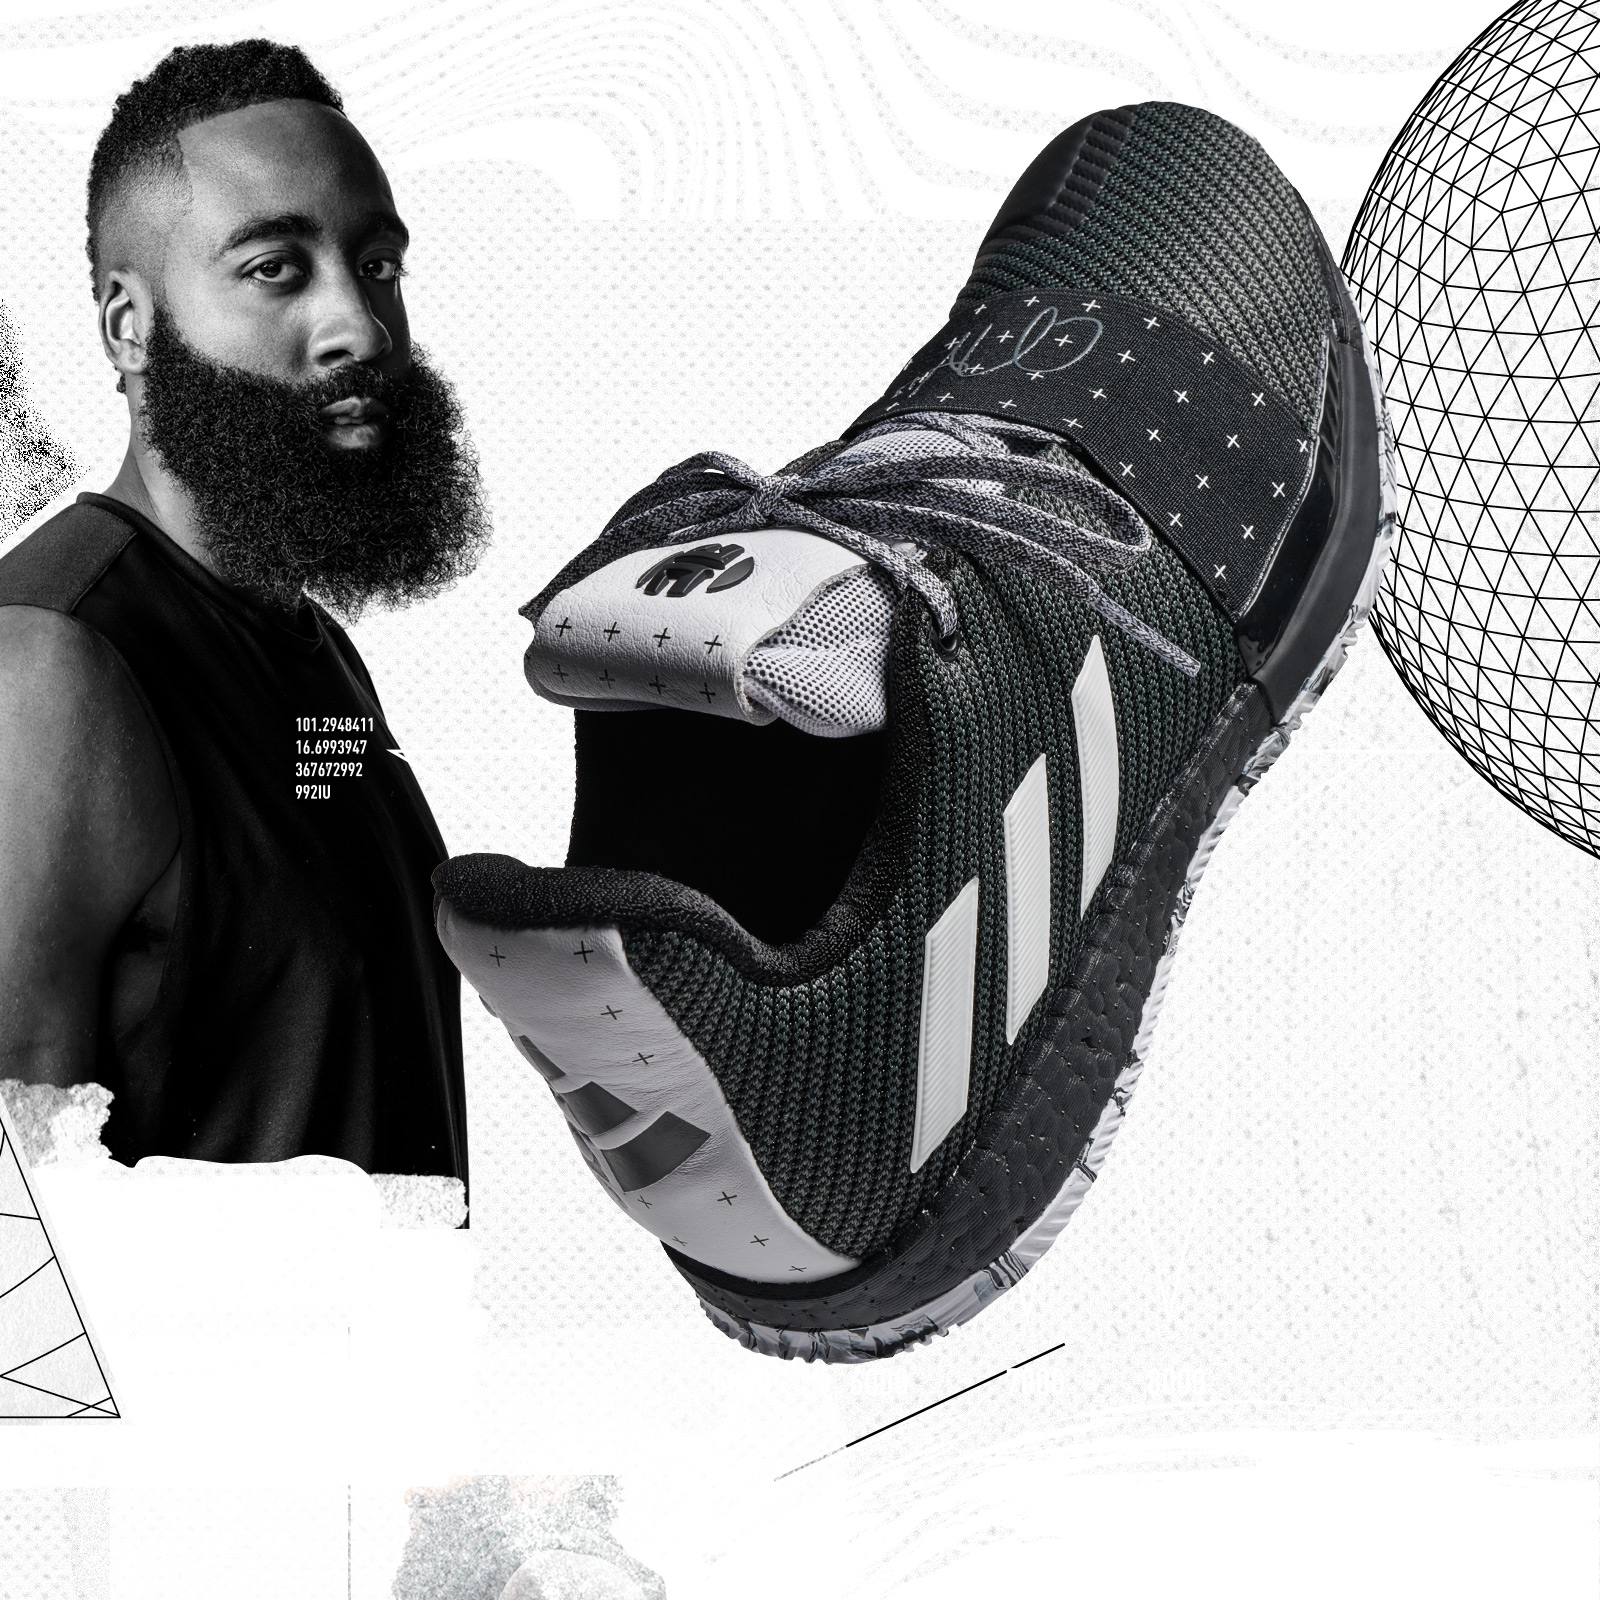 James Harden Signature Adidas Sneaker  Sneakers, James harden shoes, Nike  shoes